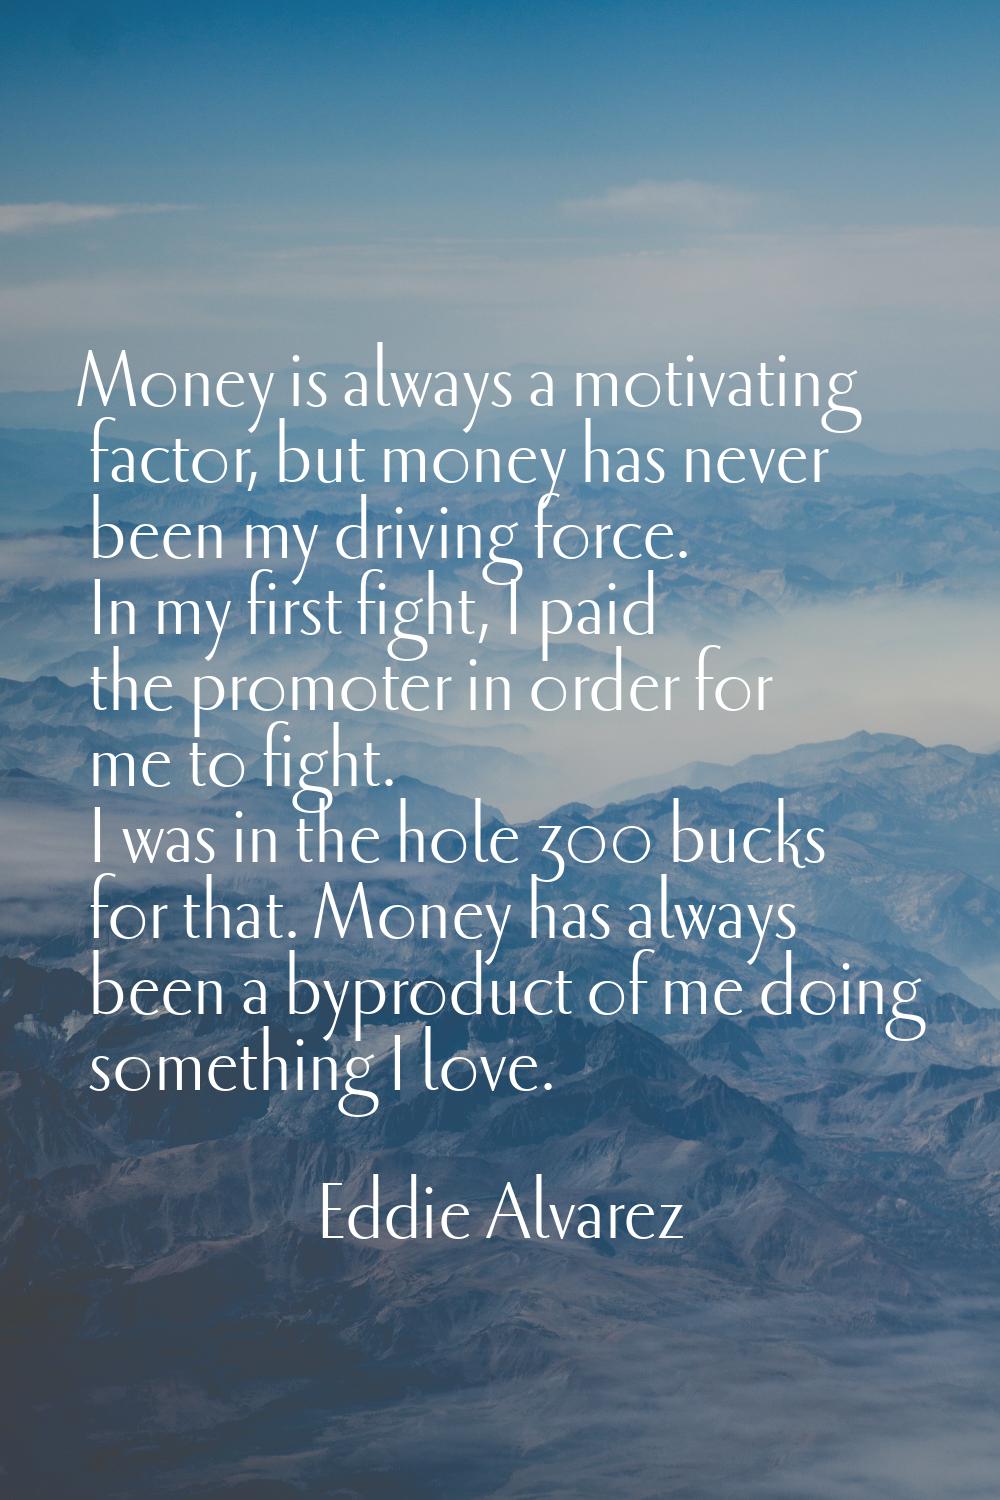 Money is always a motivating factor, but money has never been my driving force. In my first fight, 